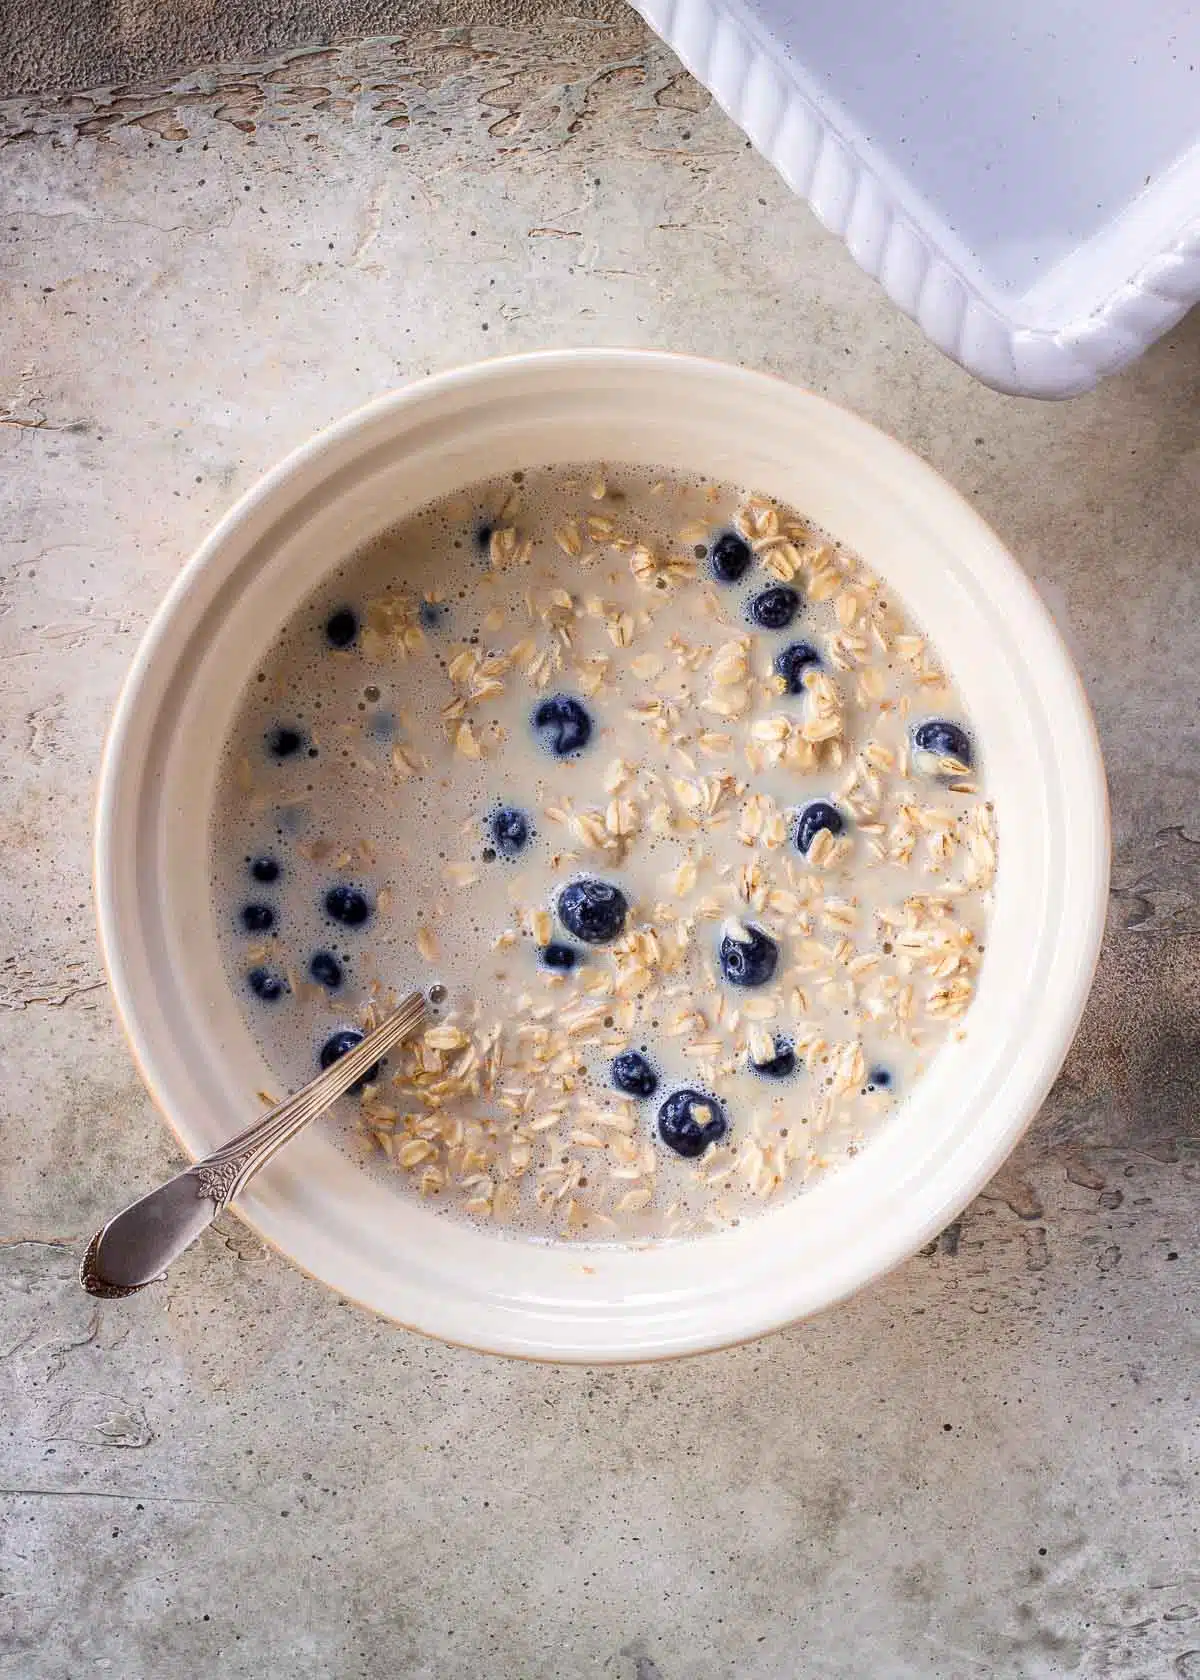 A mix of oats, dairy-free milk, blueberries, maple syrup, banana and baking powder in a bowl.